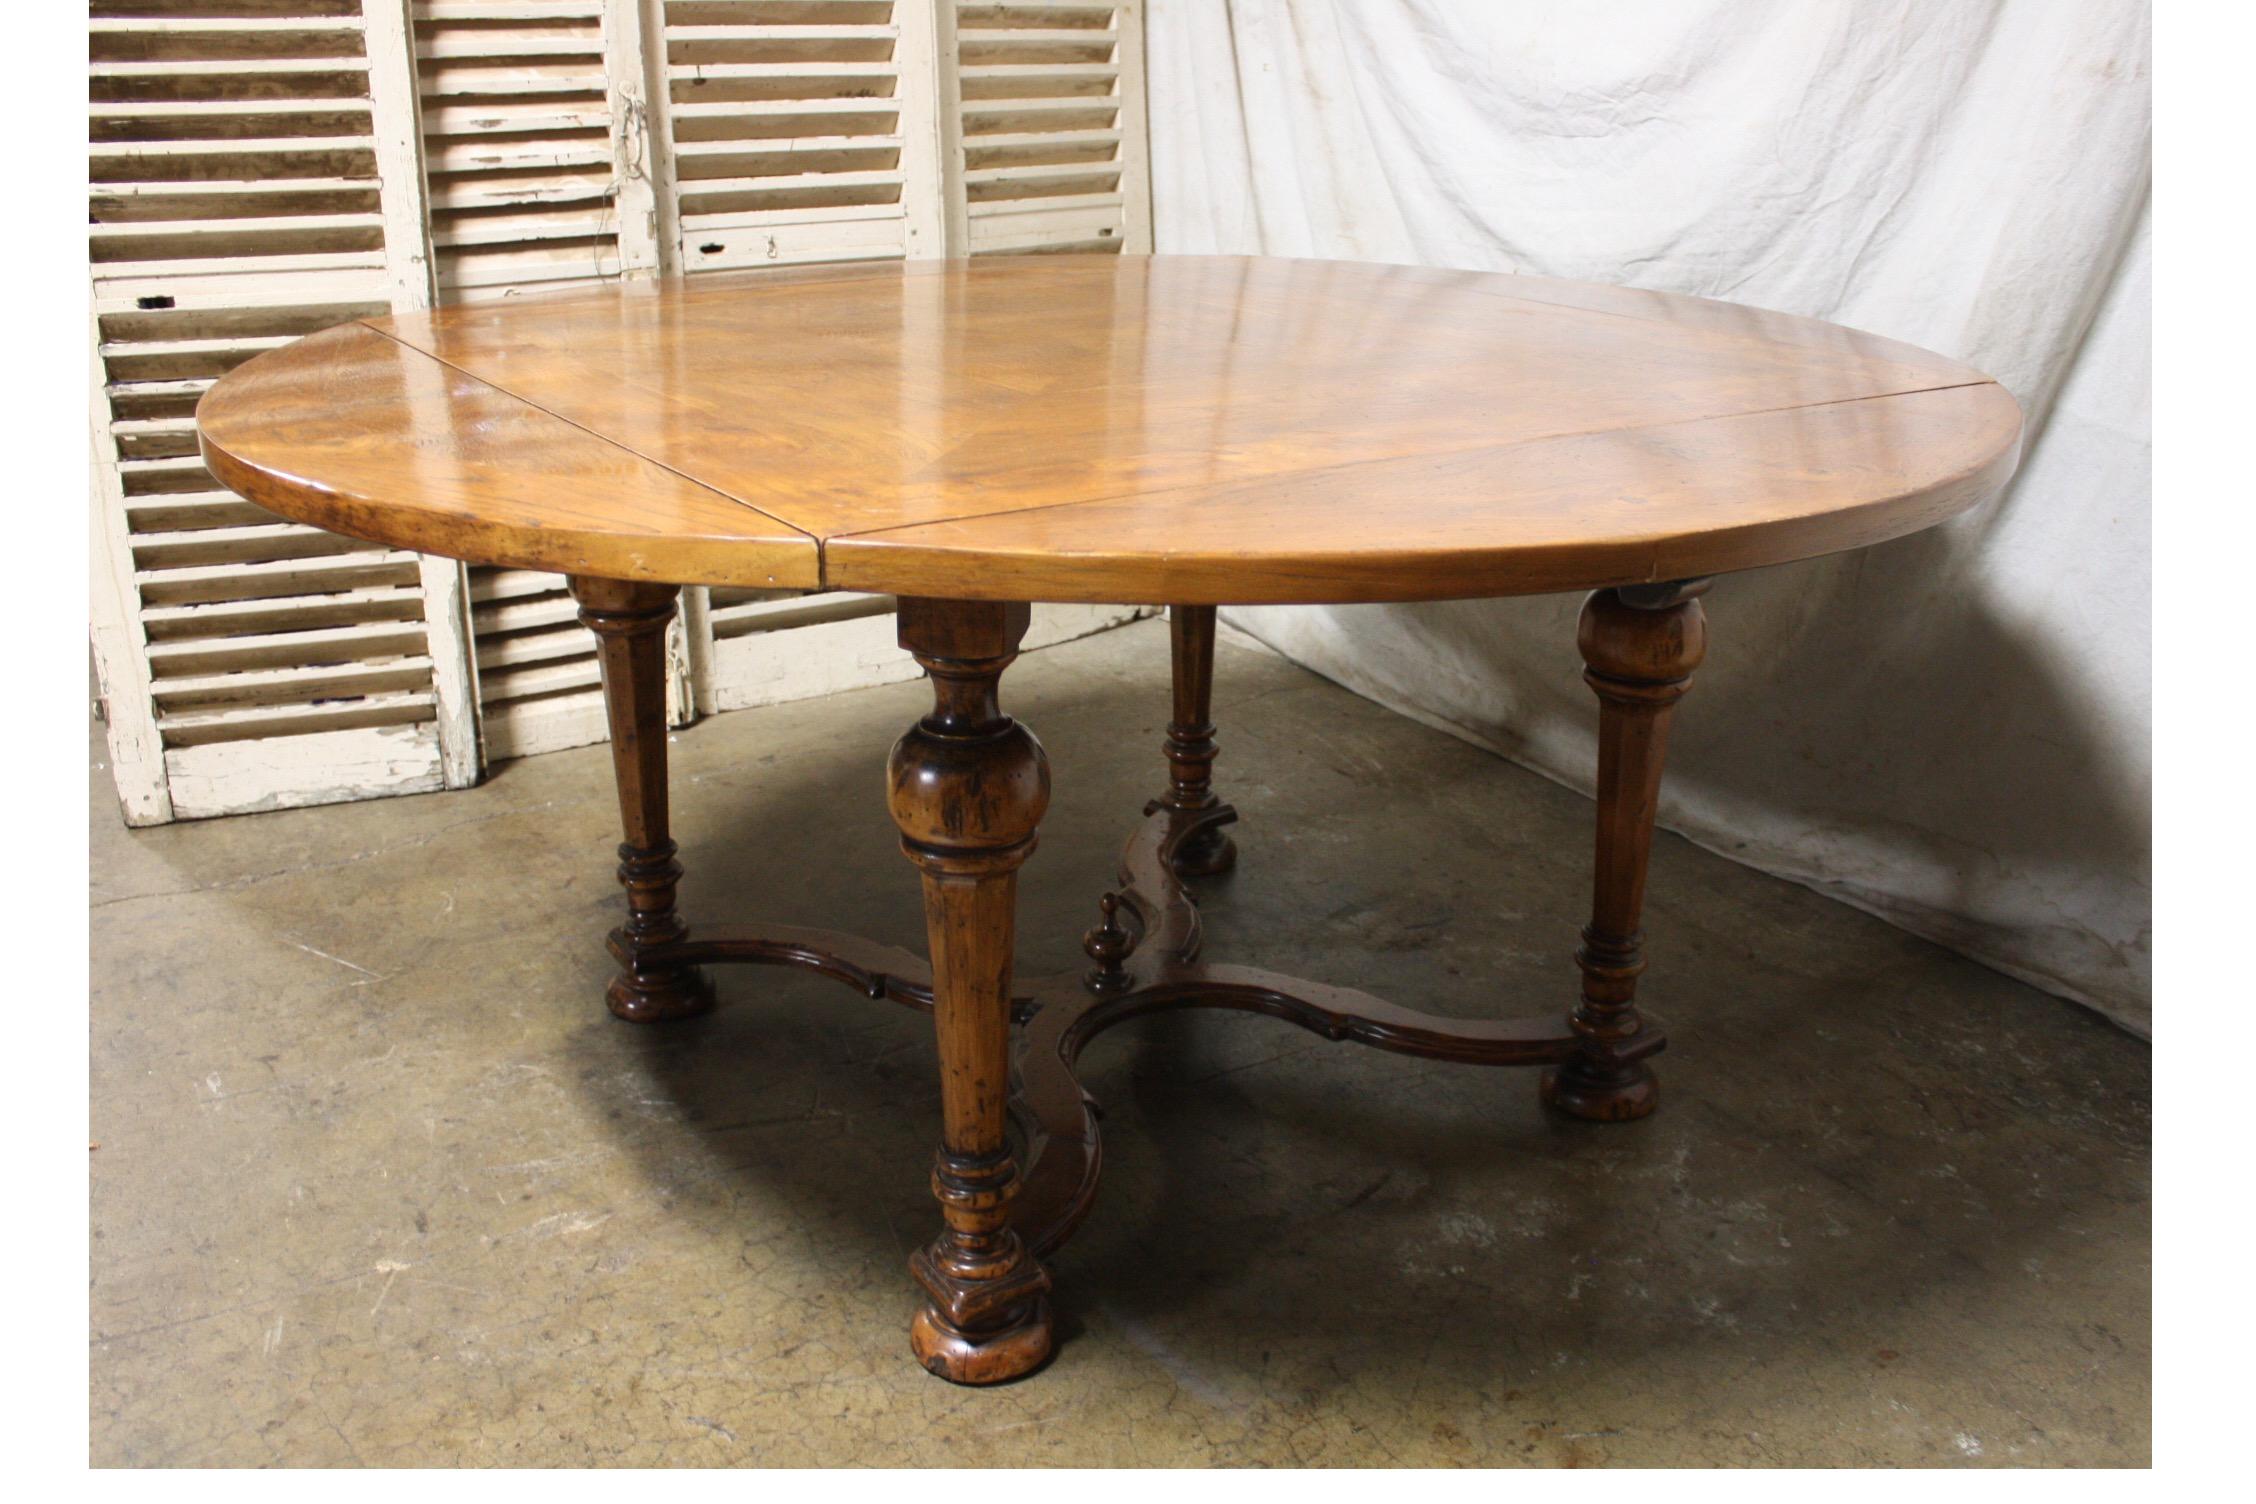 Amazing table that can be rond and square. There 4 drop leaves, the dimensions when the table is square are 47.75''W x 47.75''D x 30''H.
 